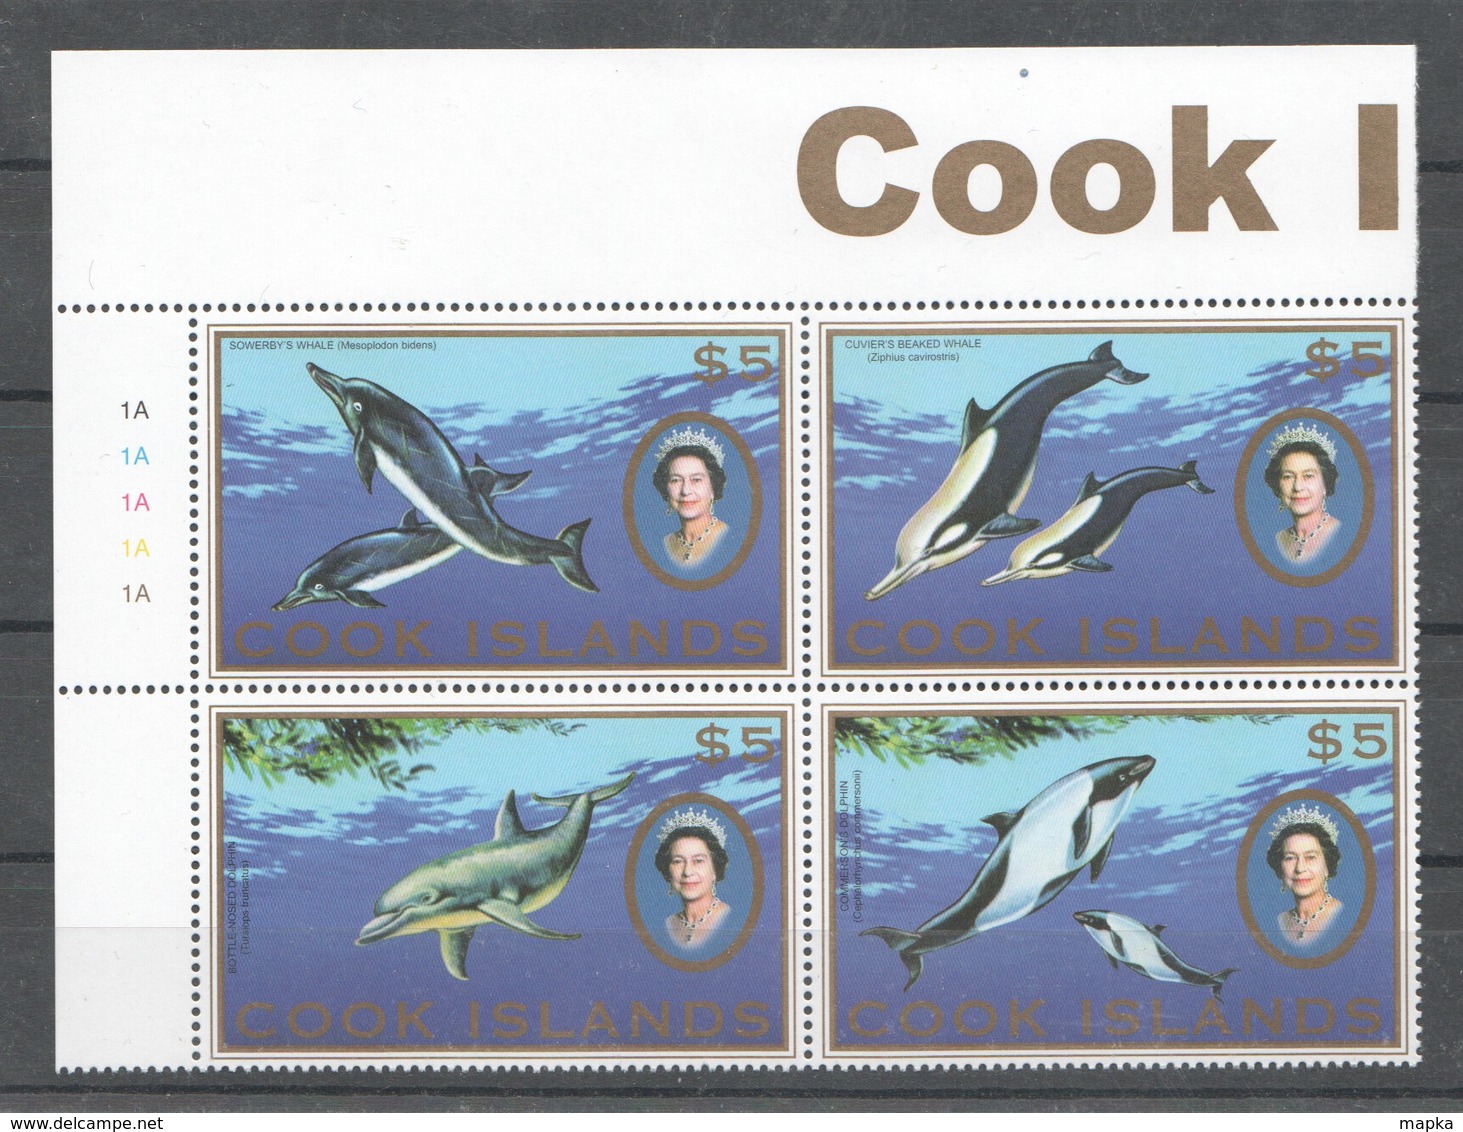 B131 COOK ISLANDS MARINE LIFE DOLPHINS WHALES QUEEN !!! MICHEL 40 EURO 1SET MNH - Dauphins